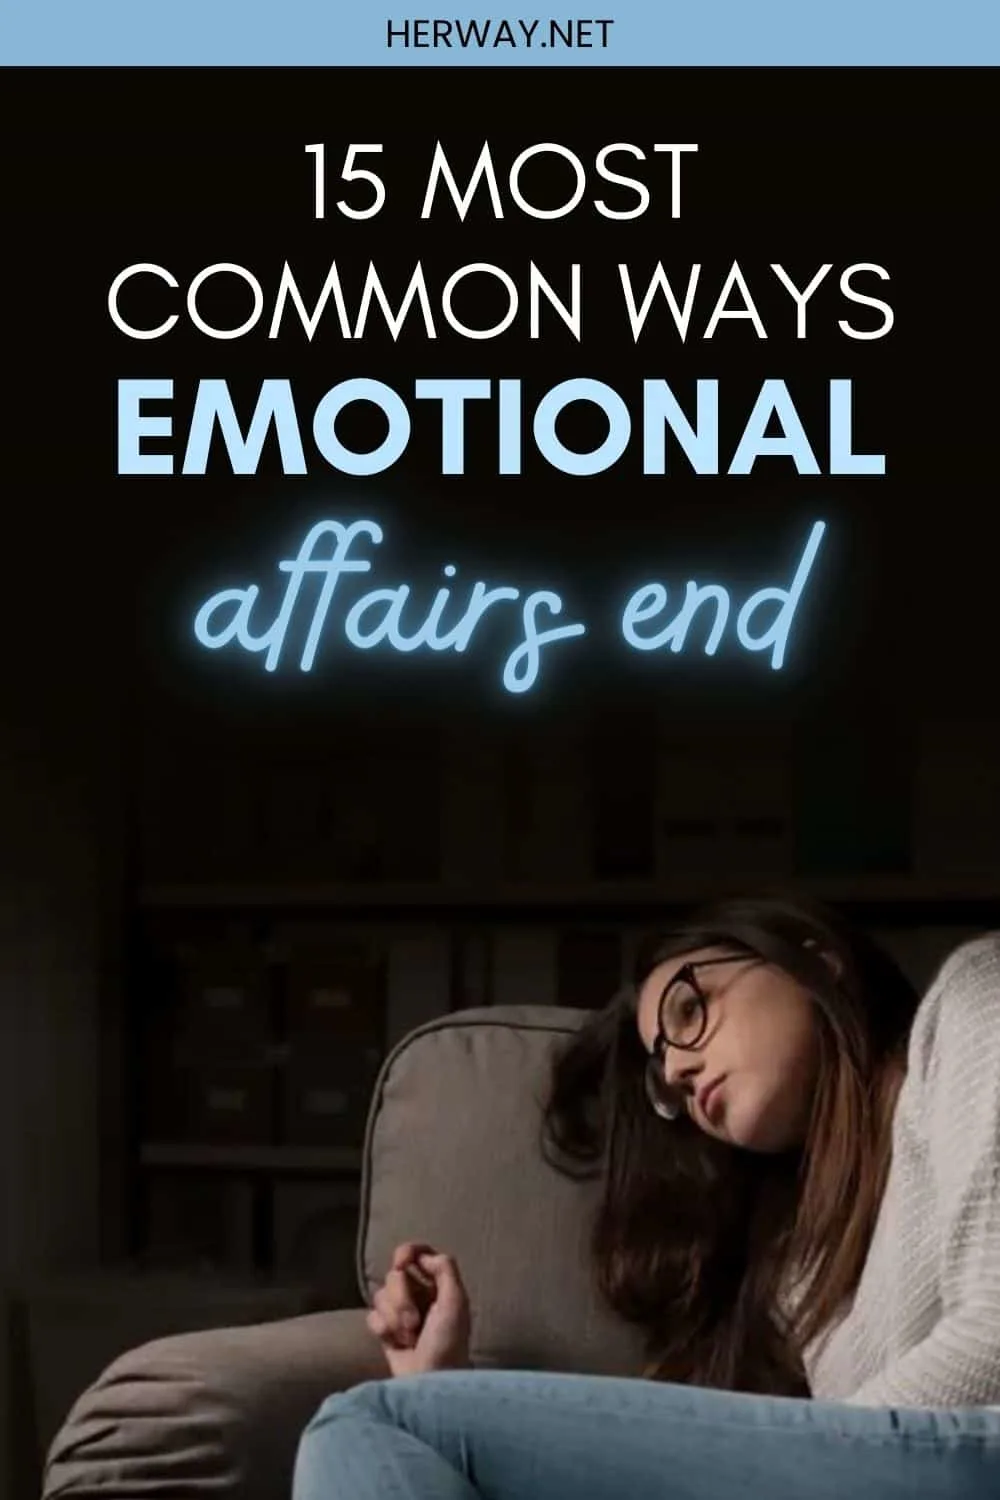 How Do Most Emotional Affairs End (15 Common Ways) Pinterest